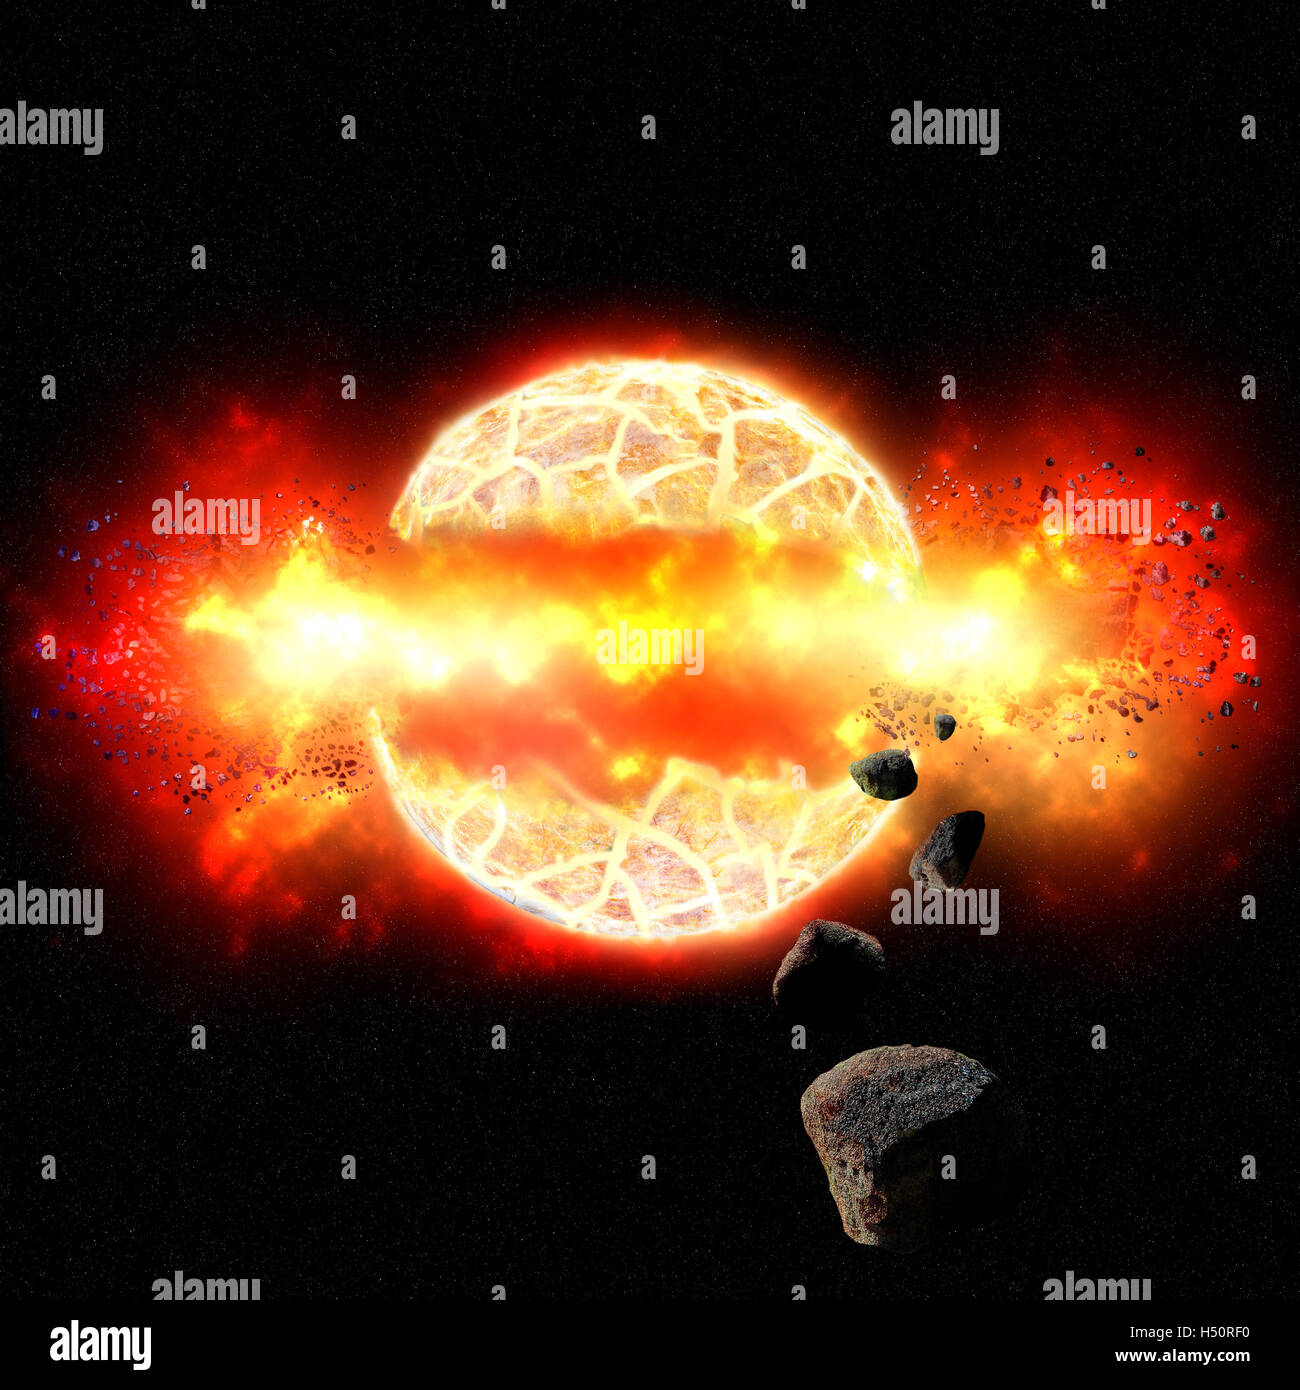 Burning planet cracks and explodes under intense heat in fiery inferno with flying debris and asteroids. Stock Photo